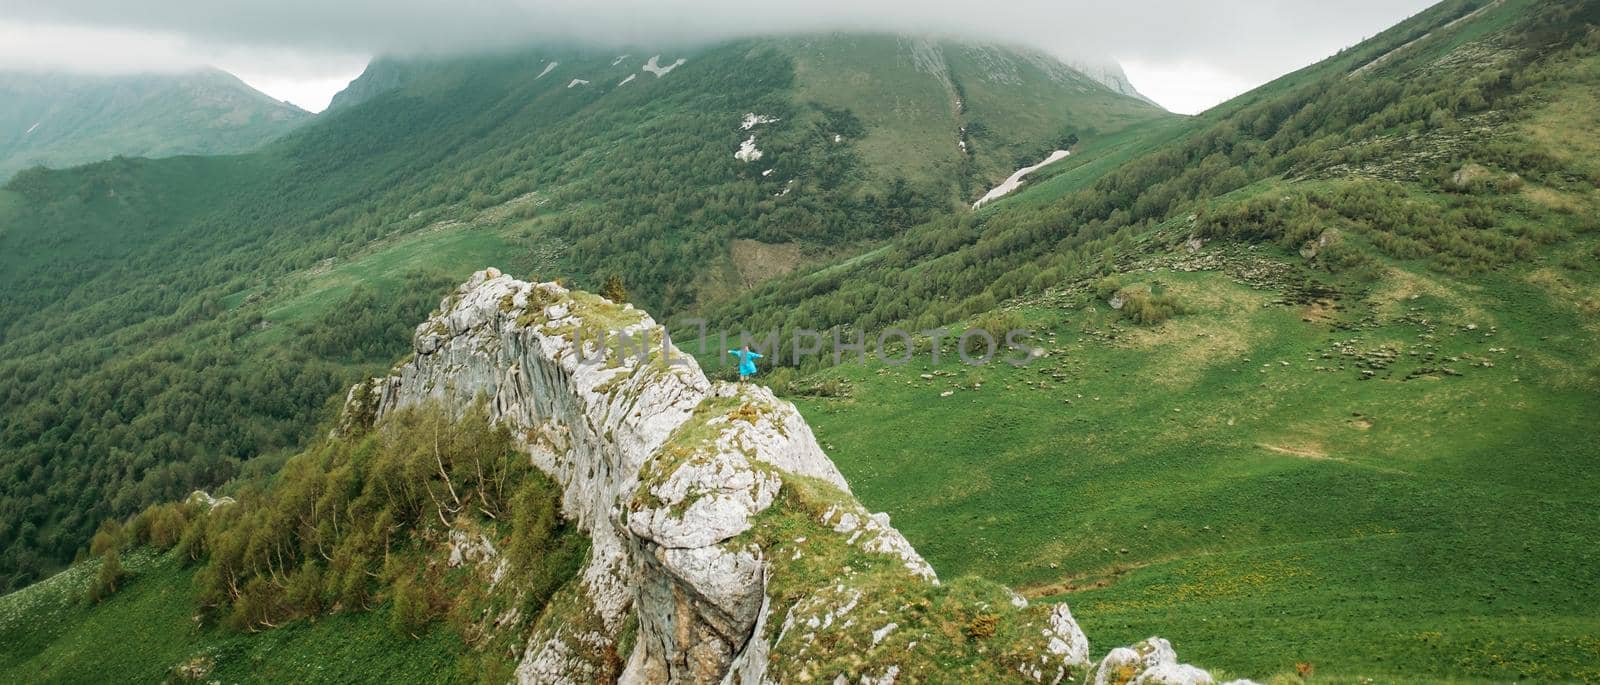 Small figure of traveler in raincoat standing with raised arms on cliff wall among mountains in summer in rainy weather.